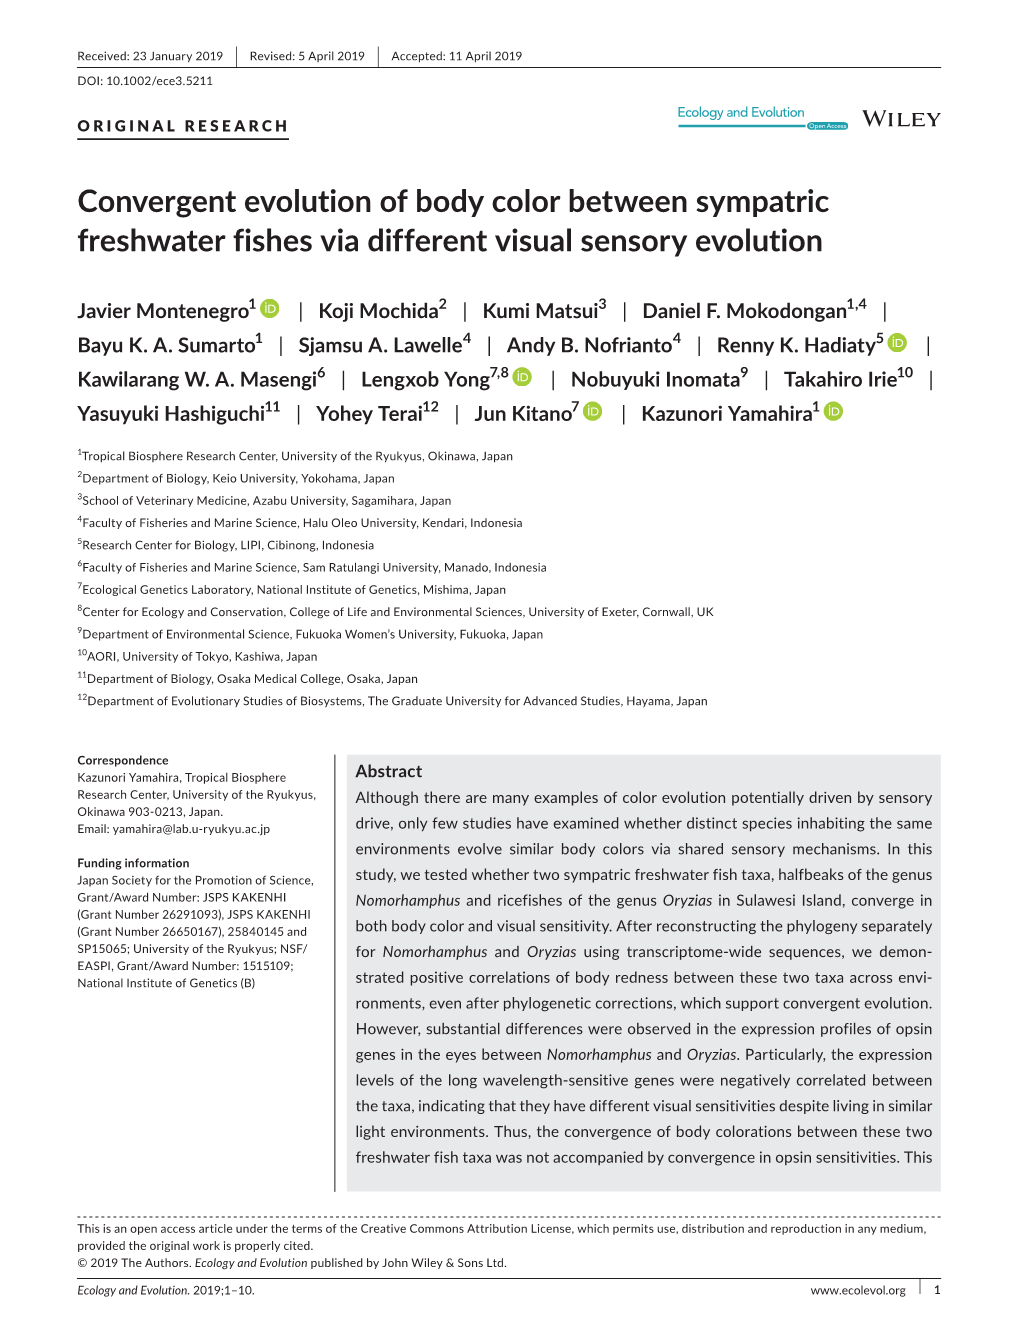 Convergent Evolution of Body Color Between Sympatric Freshwater Fishes Via Different Visual Sensory Evolution